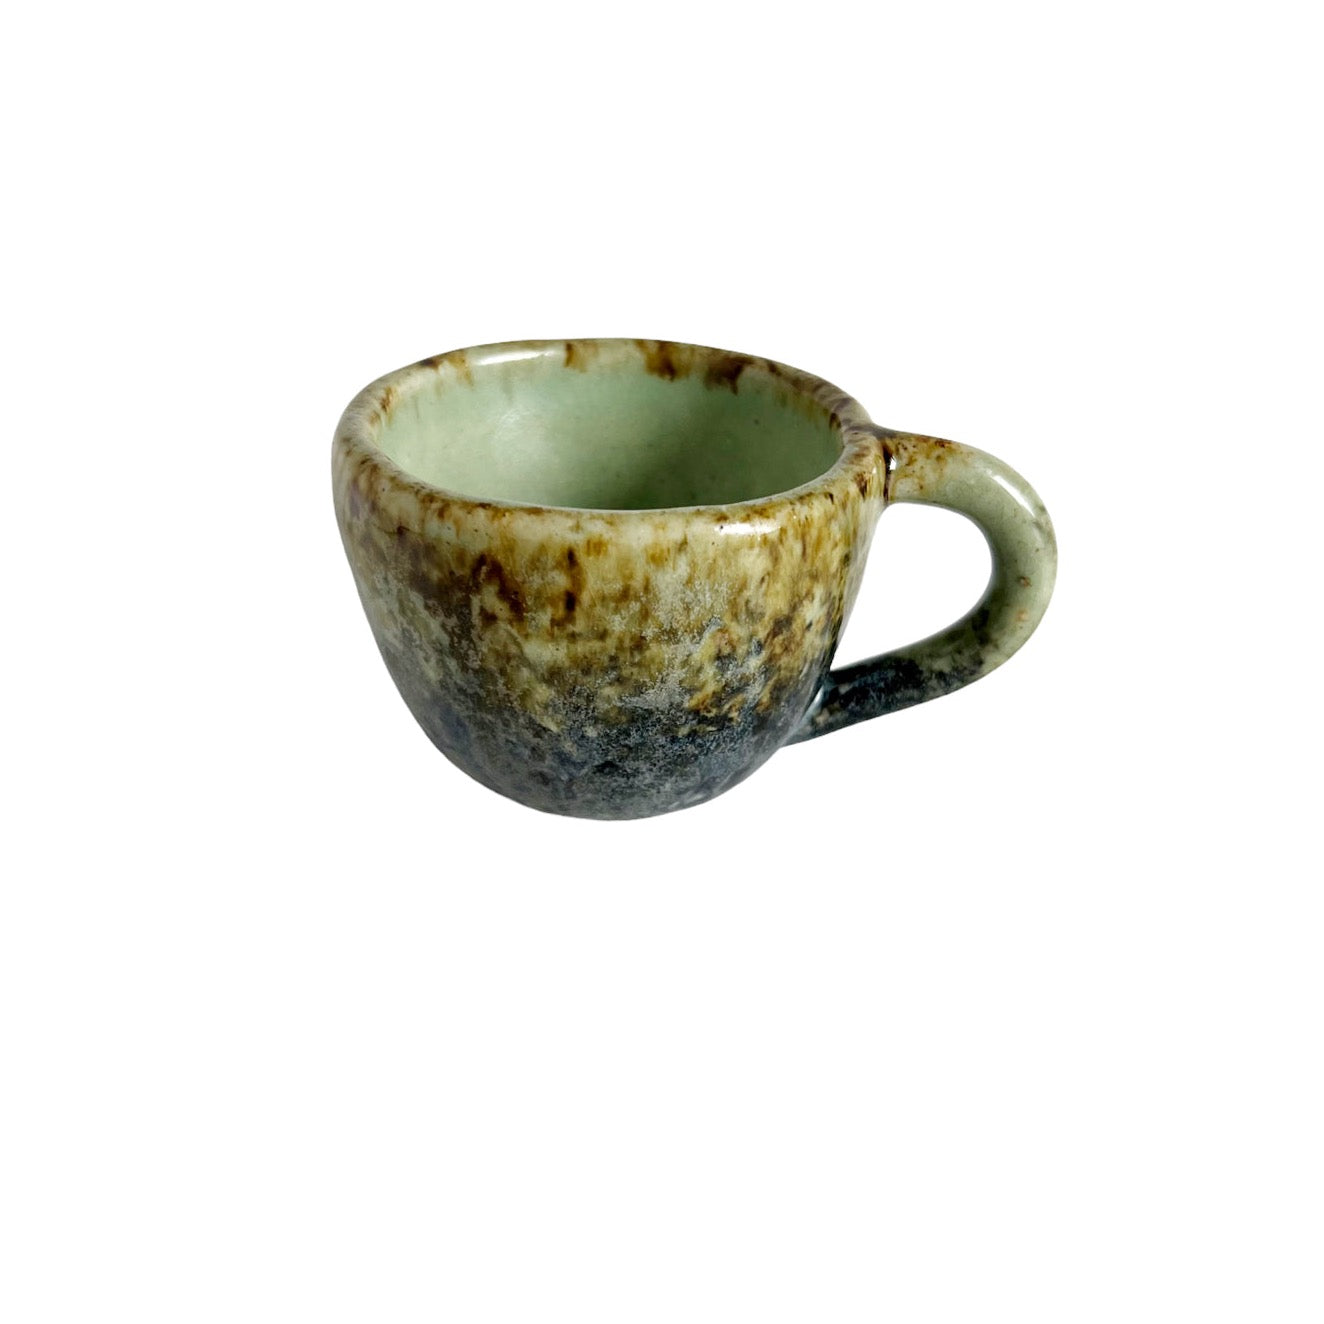 Dark green , light green and brown handmade coffee cup from Mexico